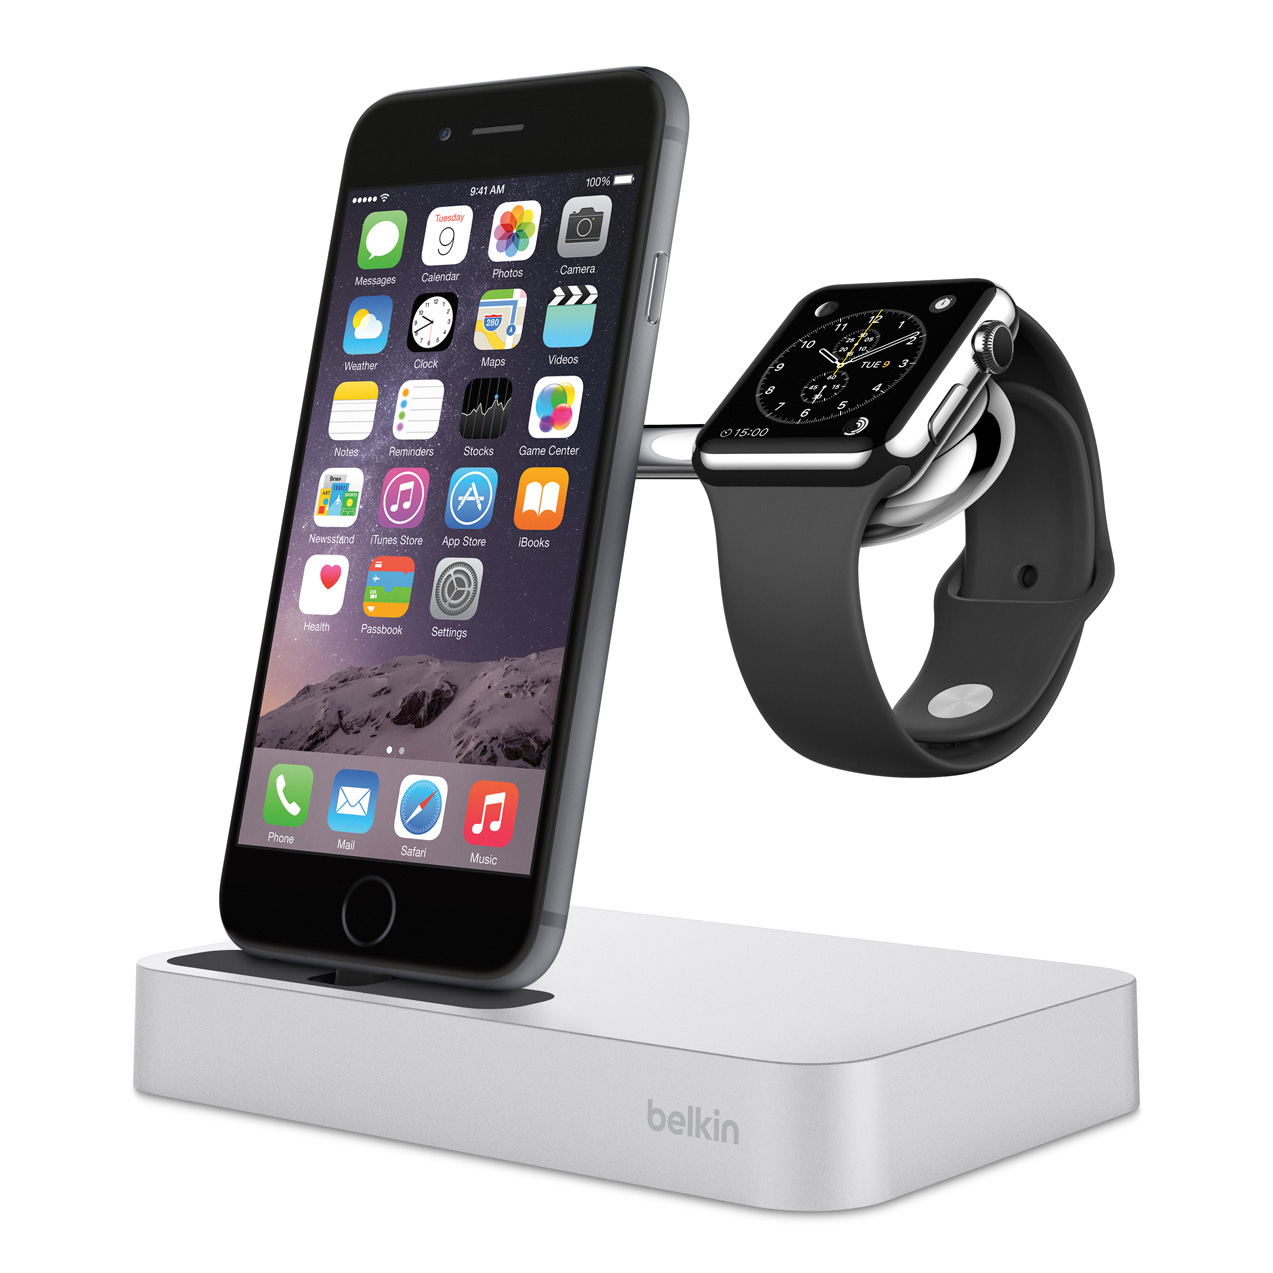 Belkin Announces New Charge Dock for Apple Watch and iPhone [Video]